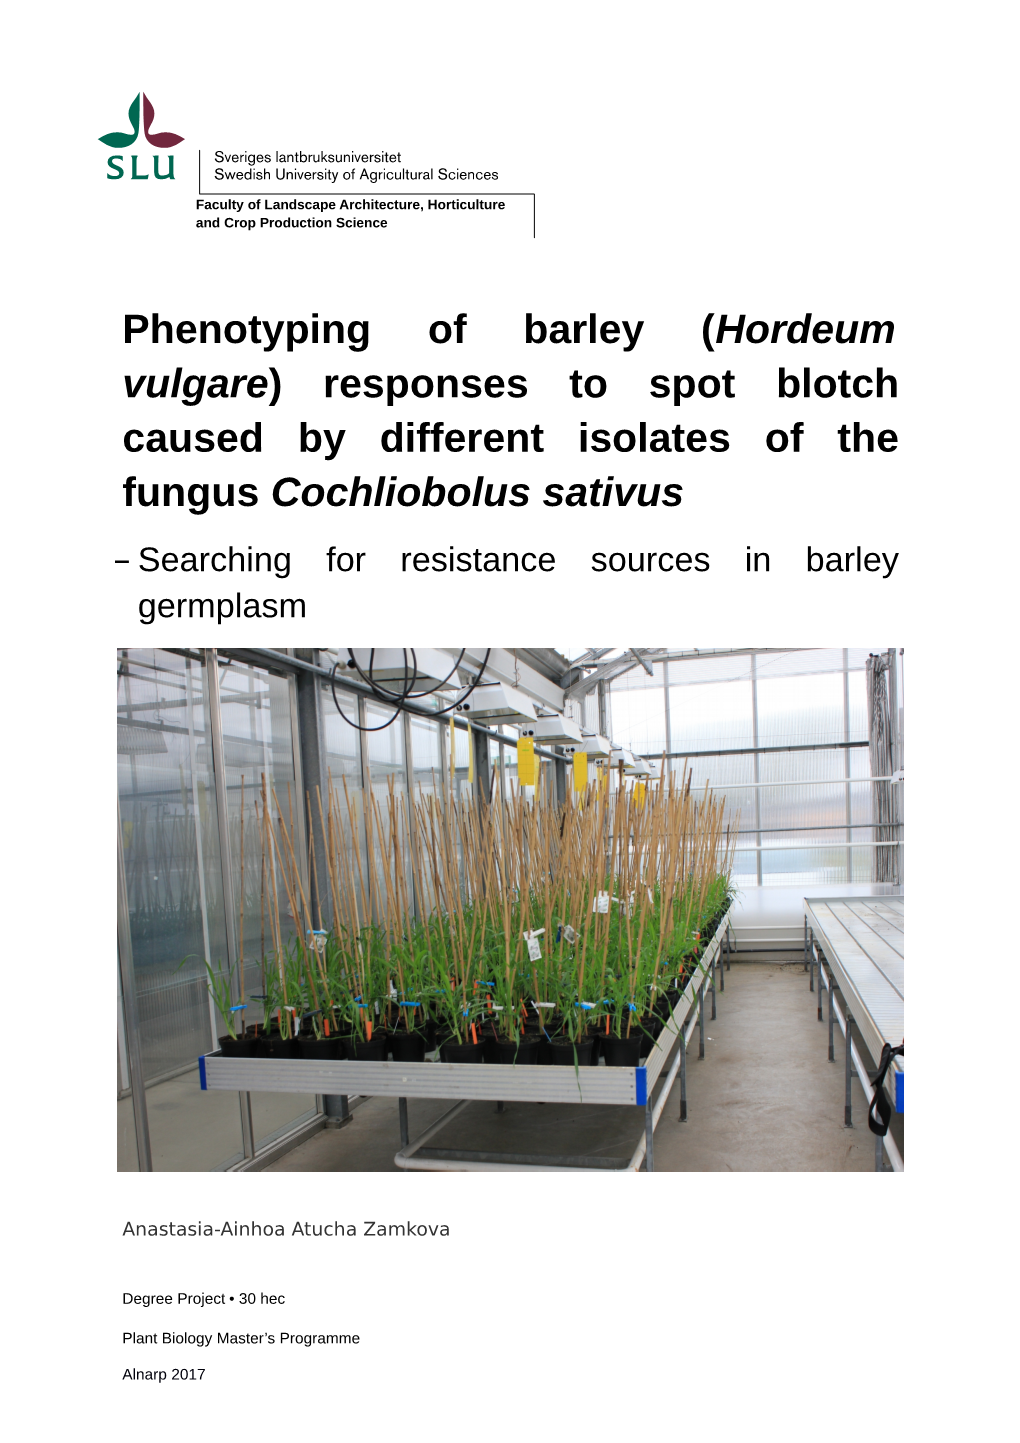 (Hordeum Vulgare) Responses to Spot Blotch Caused by Different Isolates of the Fungus Cochliobolus Sativus – Searching for Resistance Sources in Barley Germplasm